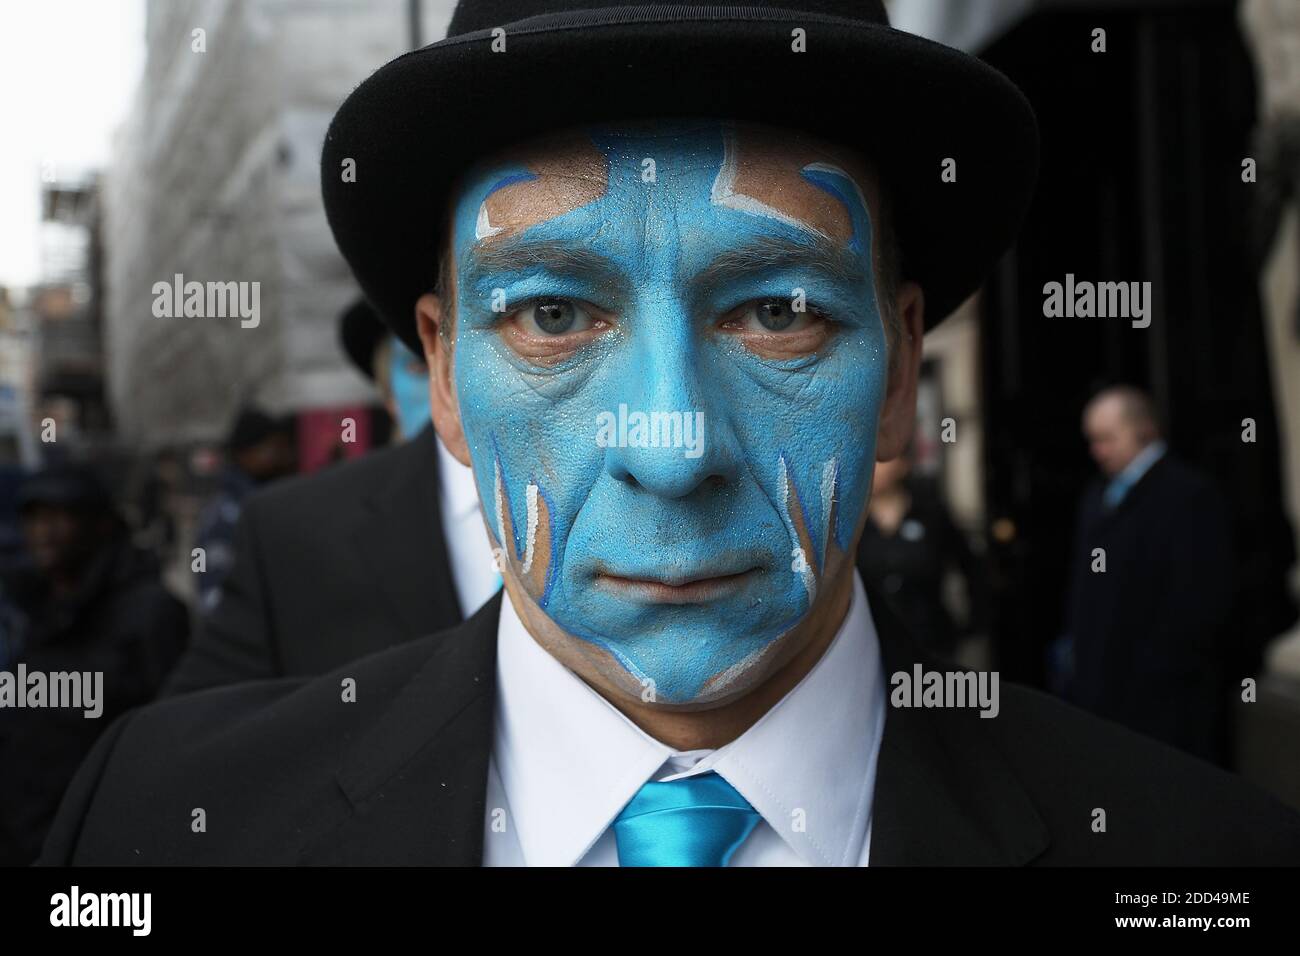 GREAT BRITAIN / England / London /Street performers with painted faces cellebrating the opening  of Barclays Bank  branch at Piccadilly Circus. Stock Photo